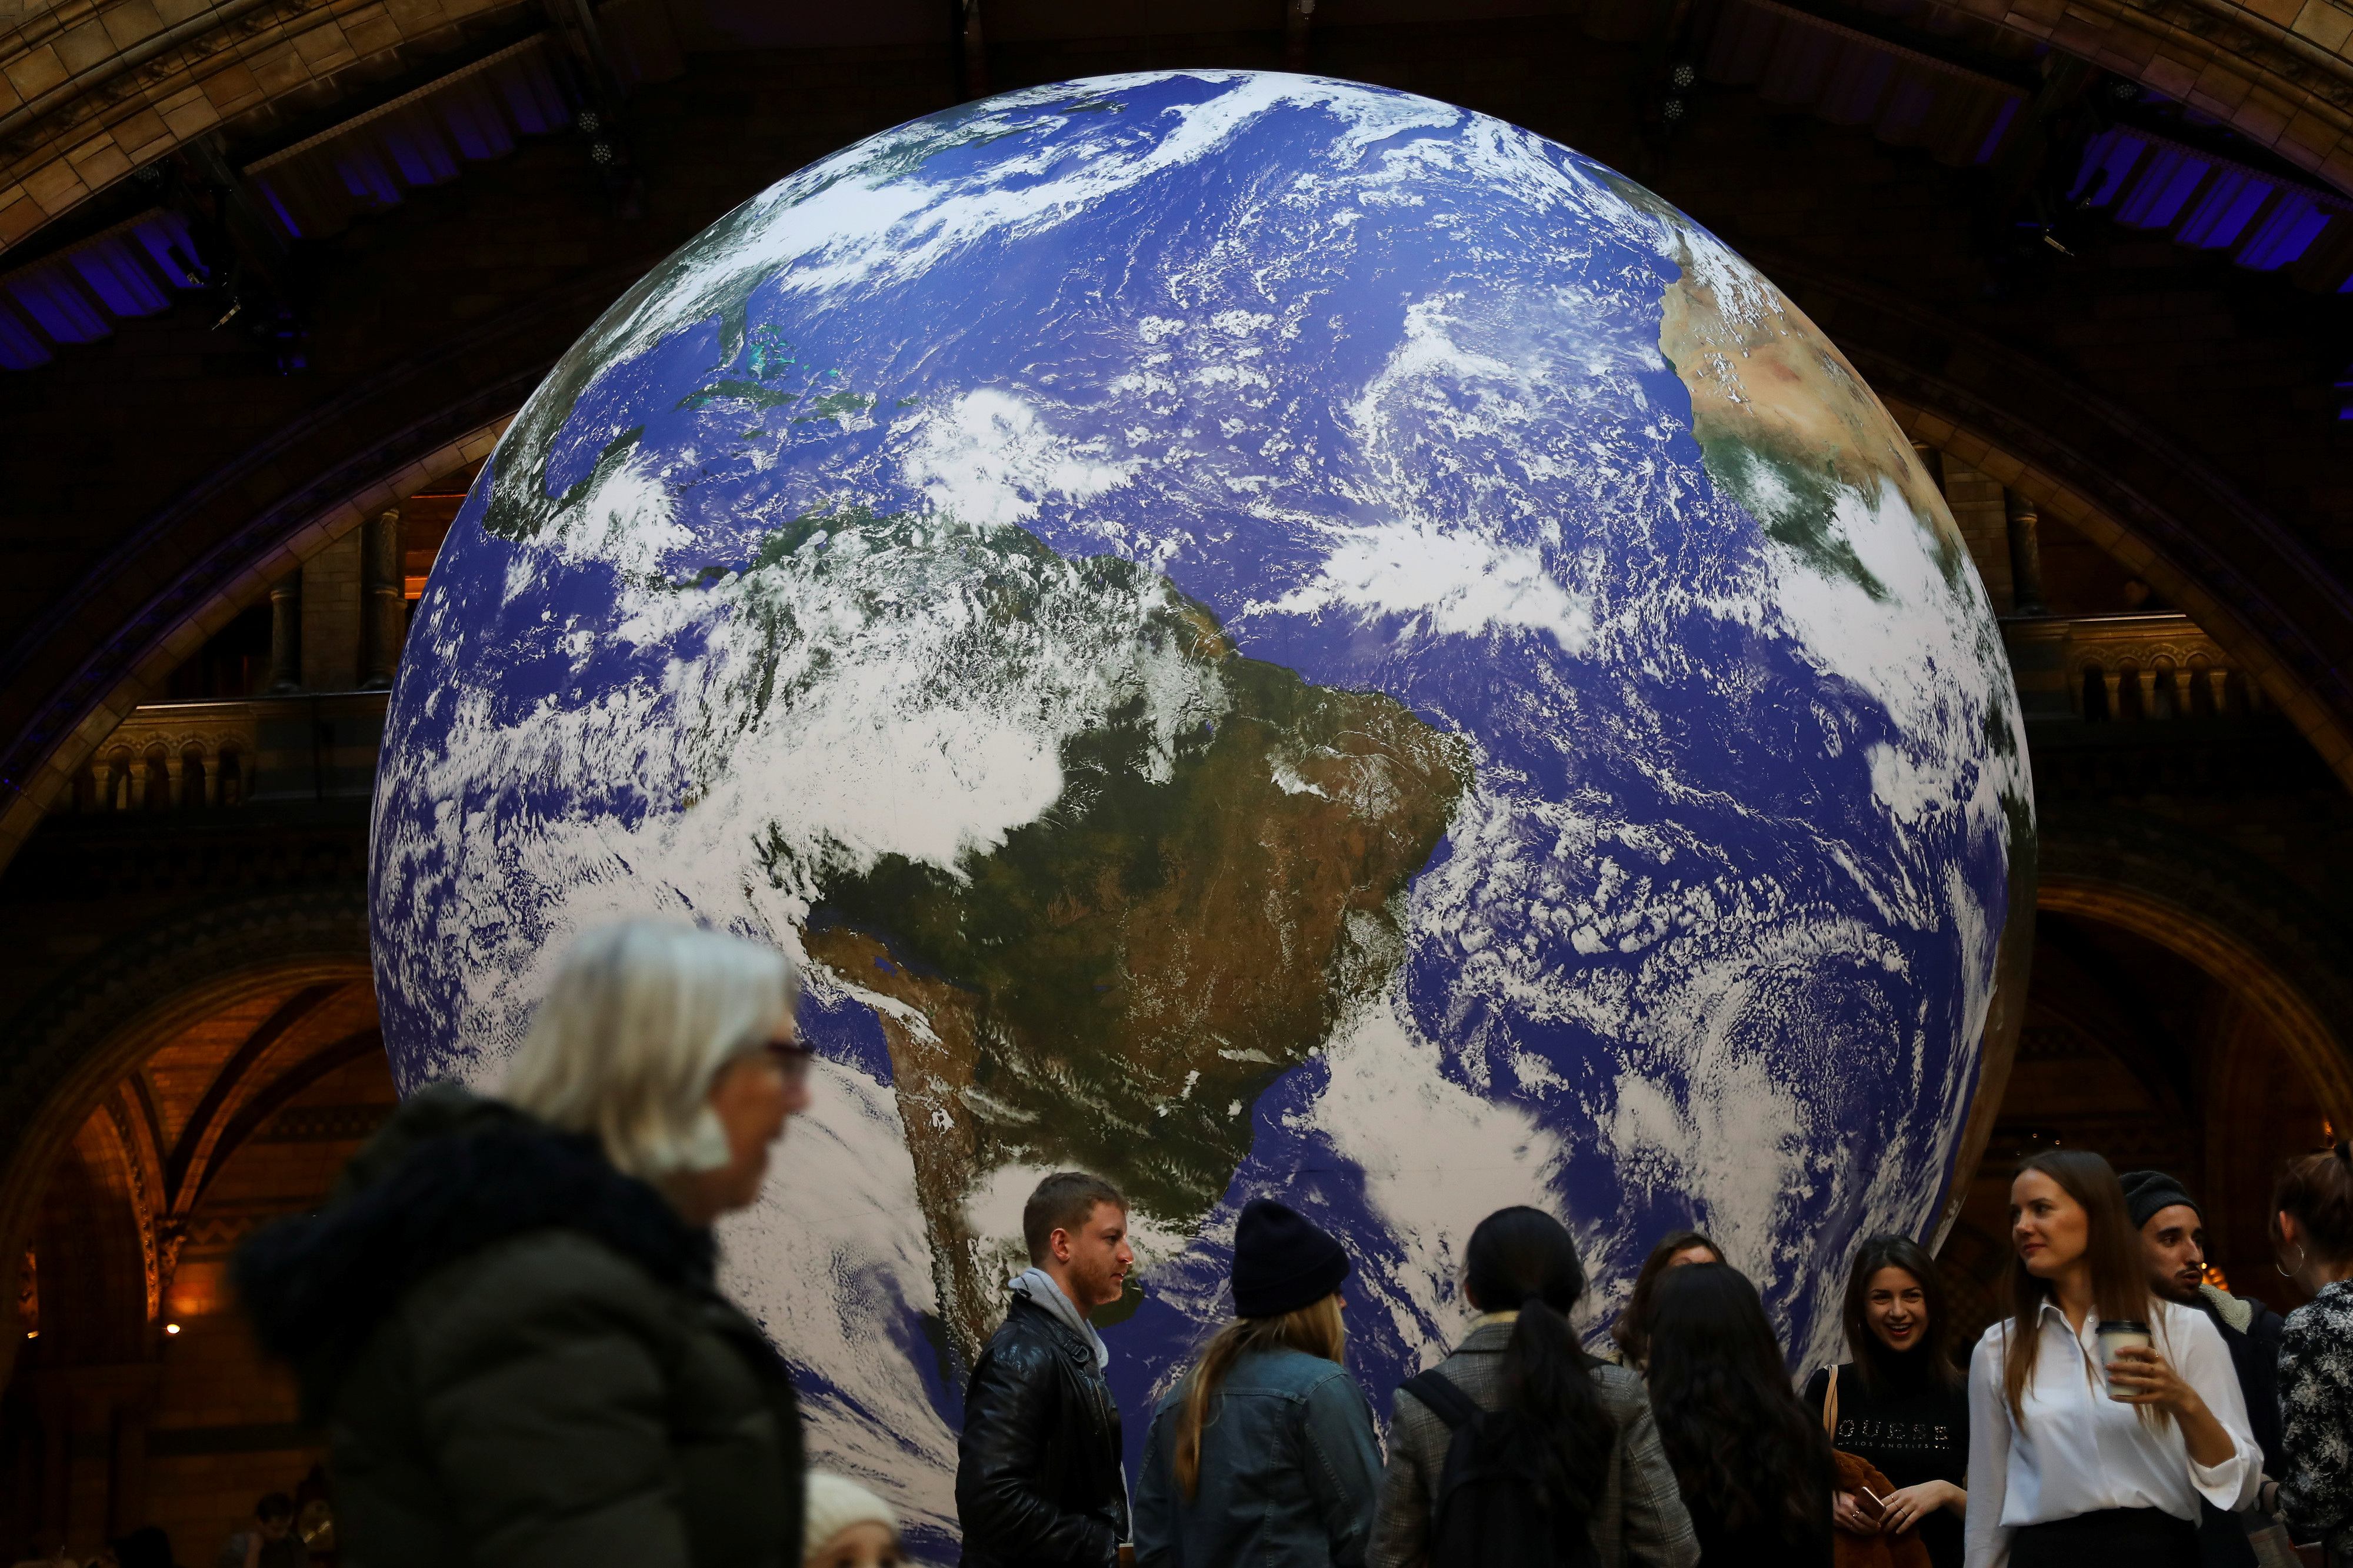 A giant Earth artwork is displayed in the Hintze Hall inside the Natural History Museum in London